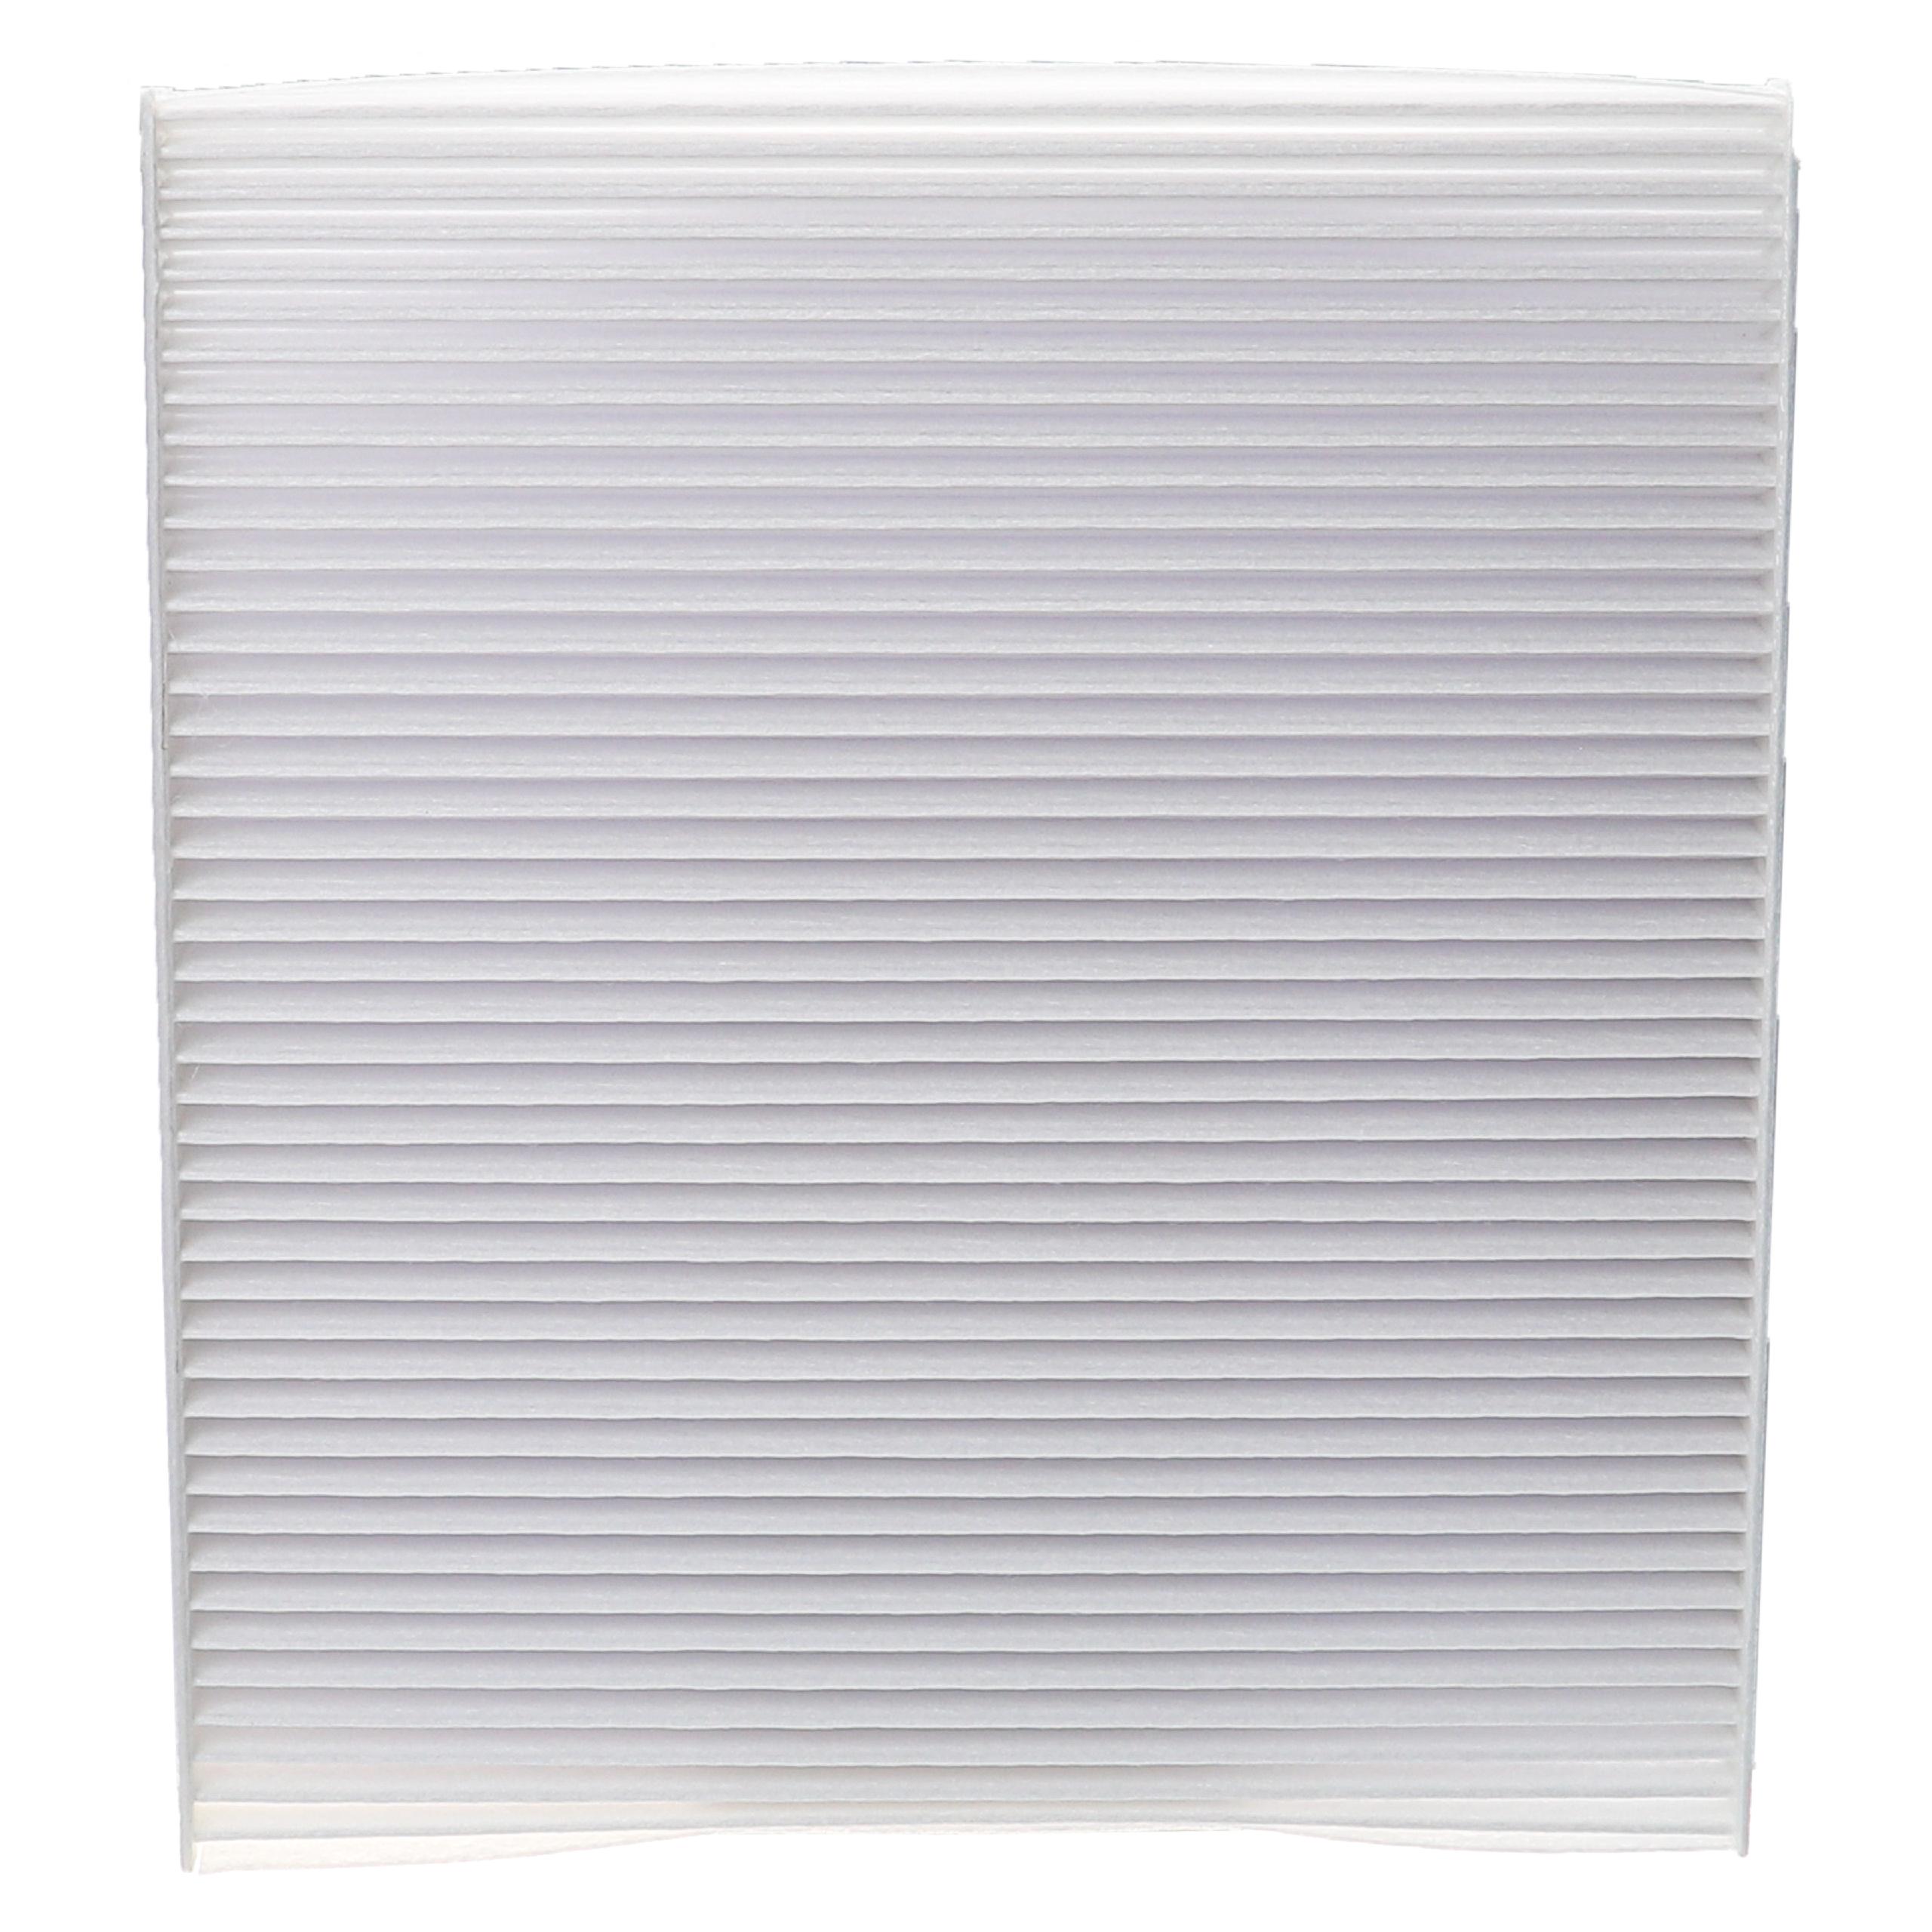 Cabin Air Filter replaces Alco Filter MS-6307 etc.